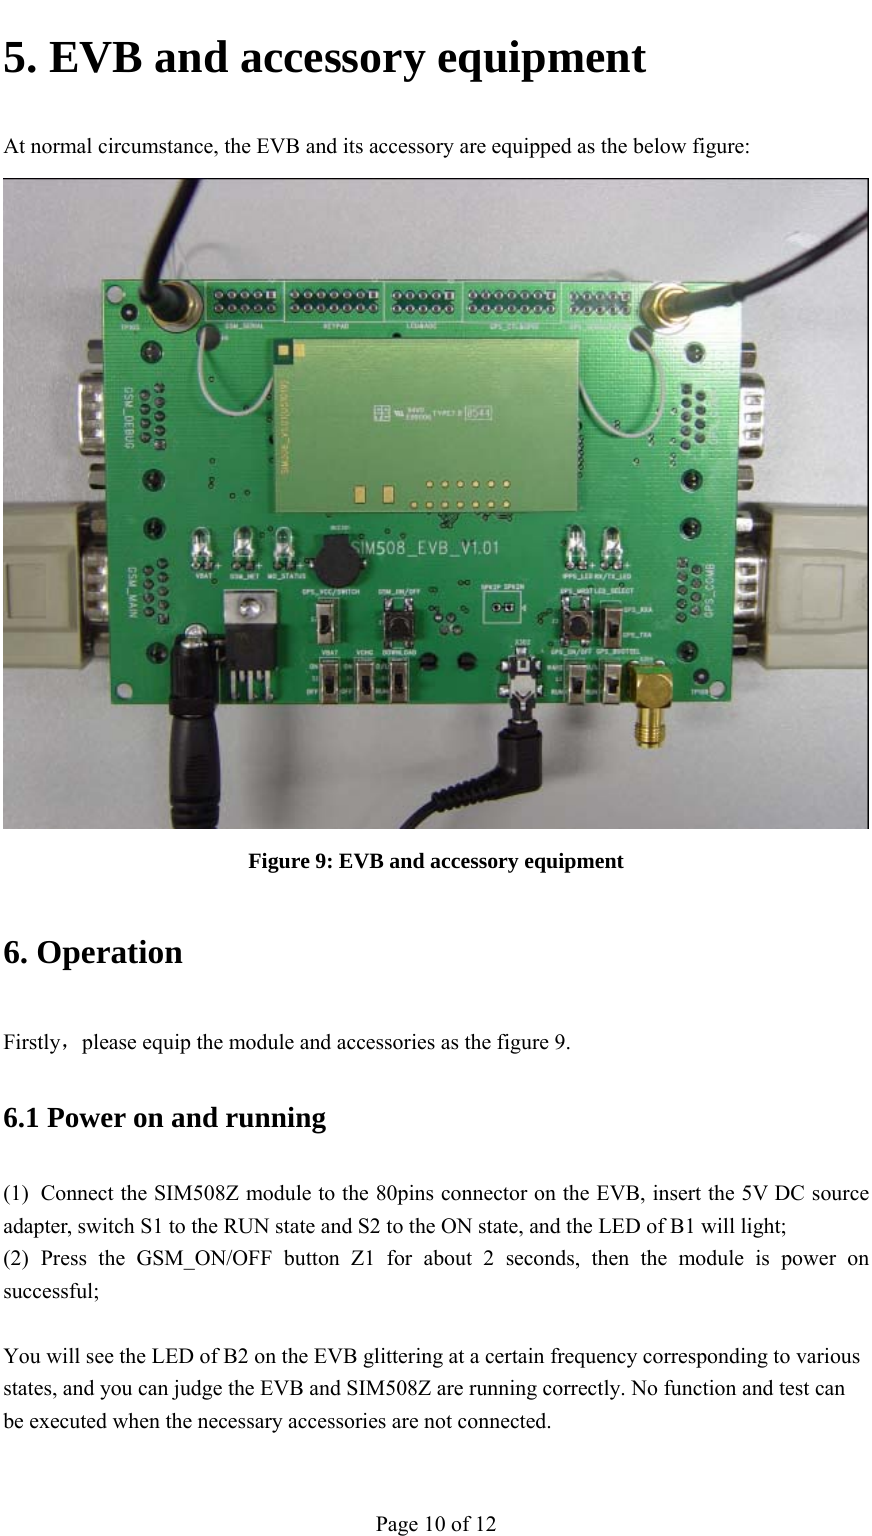                                           5. EVB and accessory equipment At normal circumstance, the EVB and its accessory are equipped as the below figure:  Figure 9: EVB and accessory equipment 6. Operation Firstly，please equip the module and accessories as the figure 9. 6.1 Power on and running (1) Connect the SIM508Z module to the 80pins connector on the EVB, insert the 5V DC source adapter, switch S1 to the RUN state and S2 to the ON state, and the LED of B1 will light; (2) Press the GSM_ON/OFF button Z1 for about 2 seconds, then the module is power on successful;  You will see the LED of B2 on the EVB glittering at a certain frequency corresponding to various states, and you can judge the EVB and SIM508Z are running correctly. No function and test can be executed when the necessary accessories are not connected. Page 10 of 12 